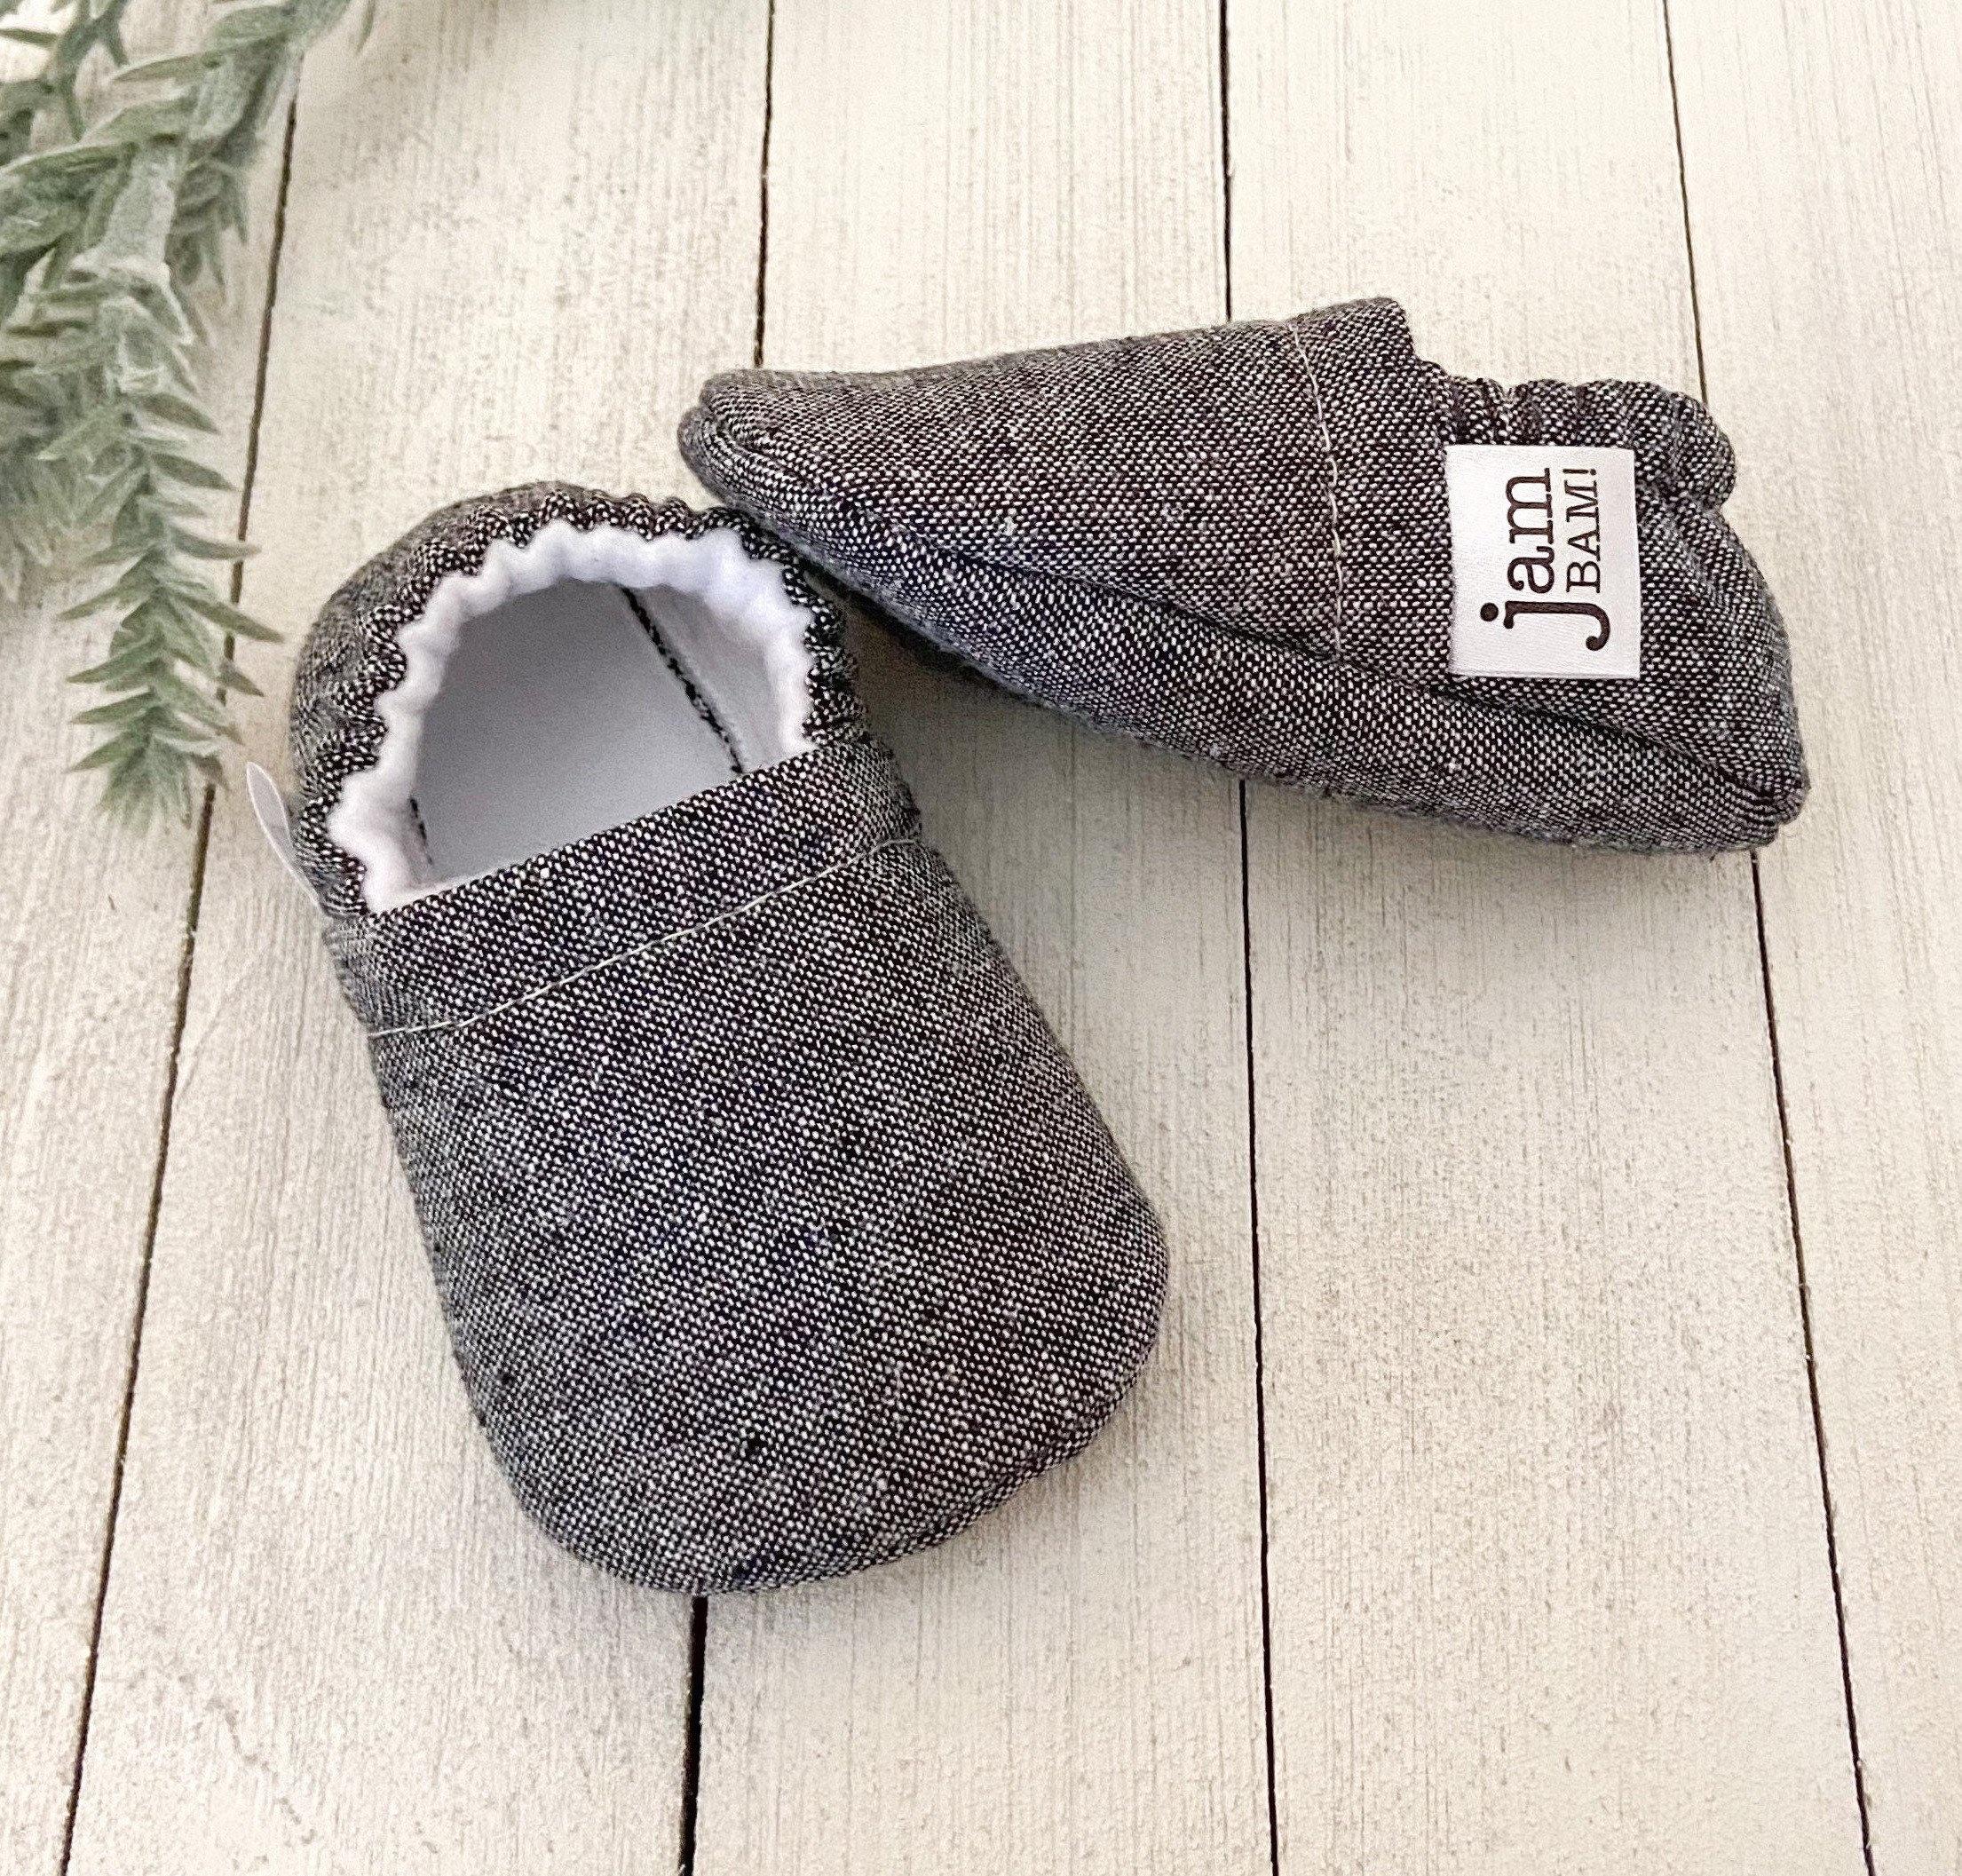 Charcoal Linen Blend Baby Booties, Slippers, Crib Shoes, Soft Sole, Moccasins, Shoes